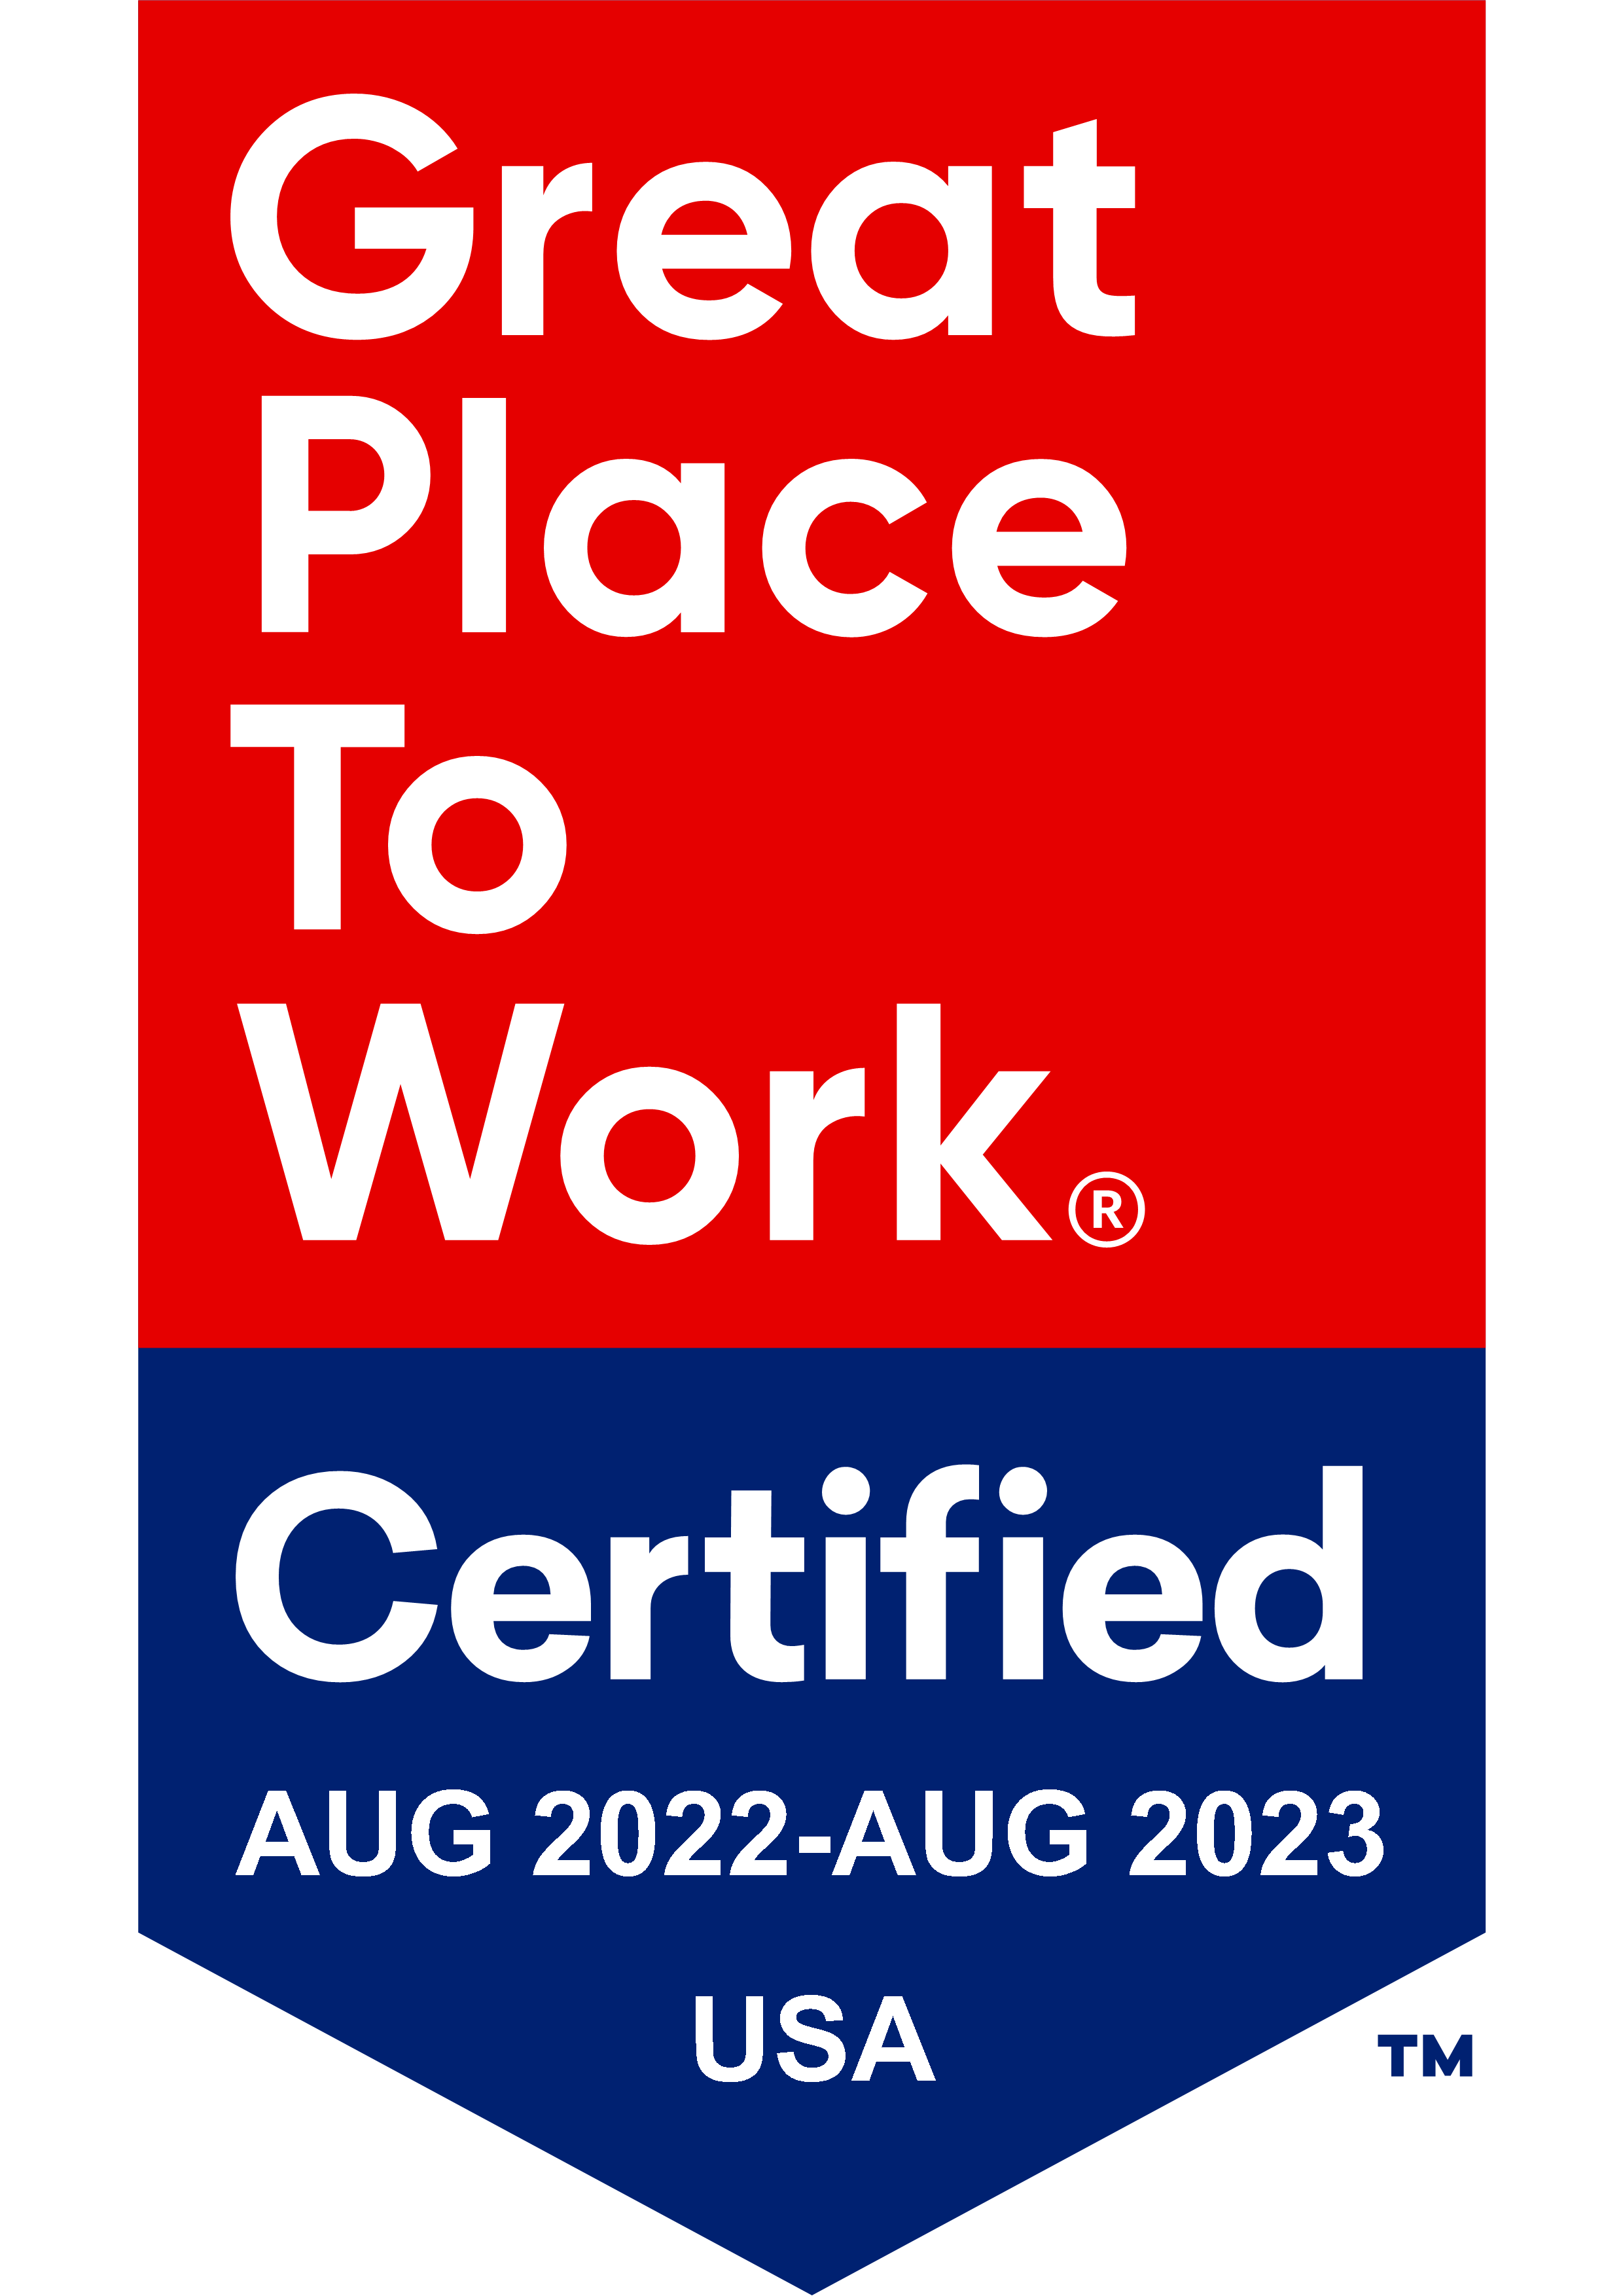 Great Place to Work Certified AUG 2022-AUG 2023 USA